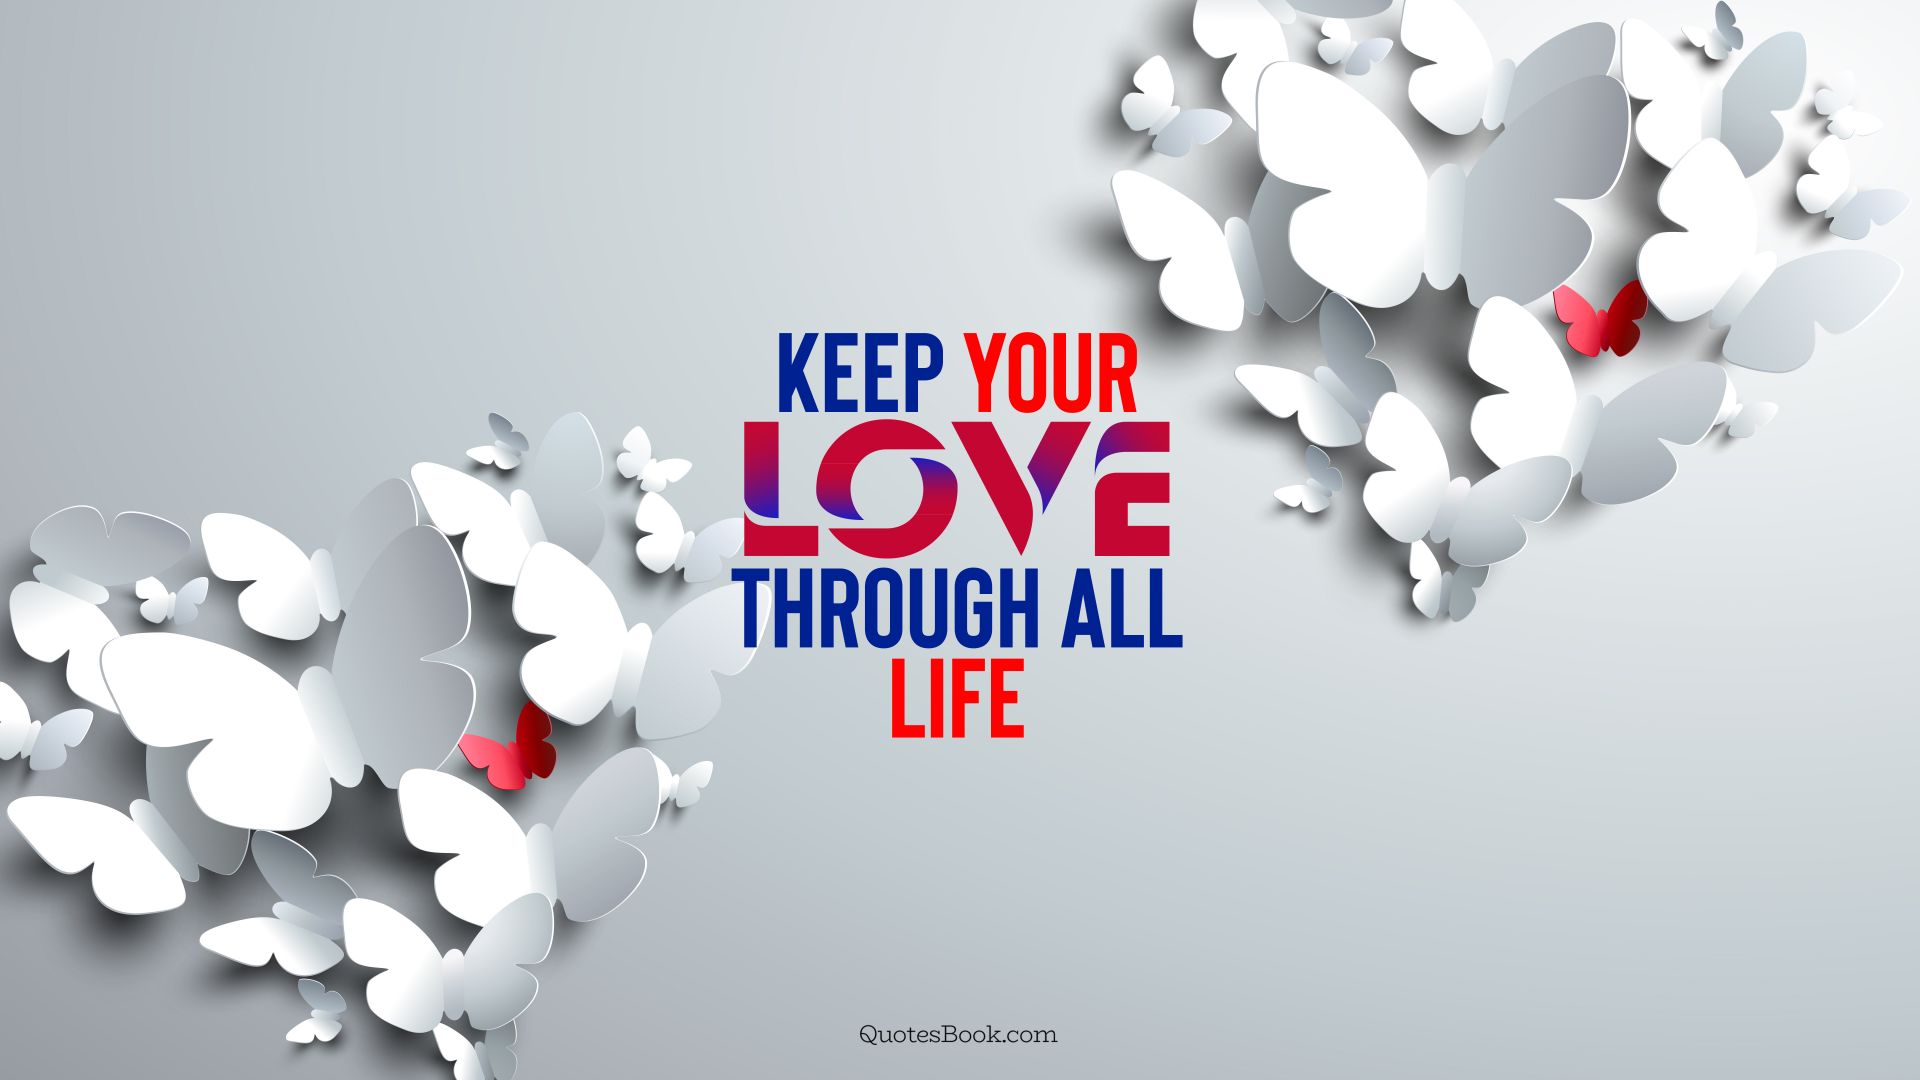 Keep your love through all life. - Quote by QuotesBook